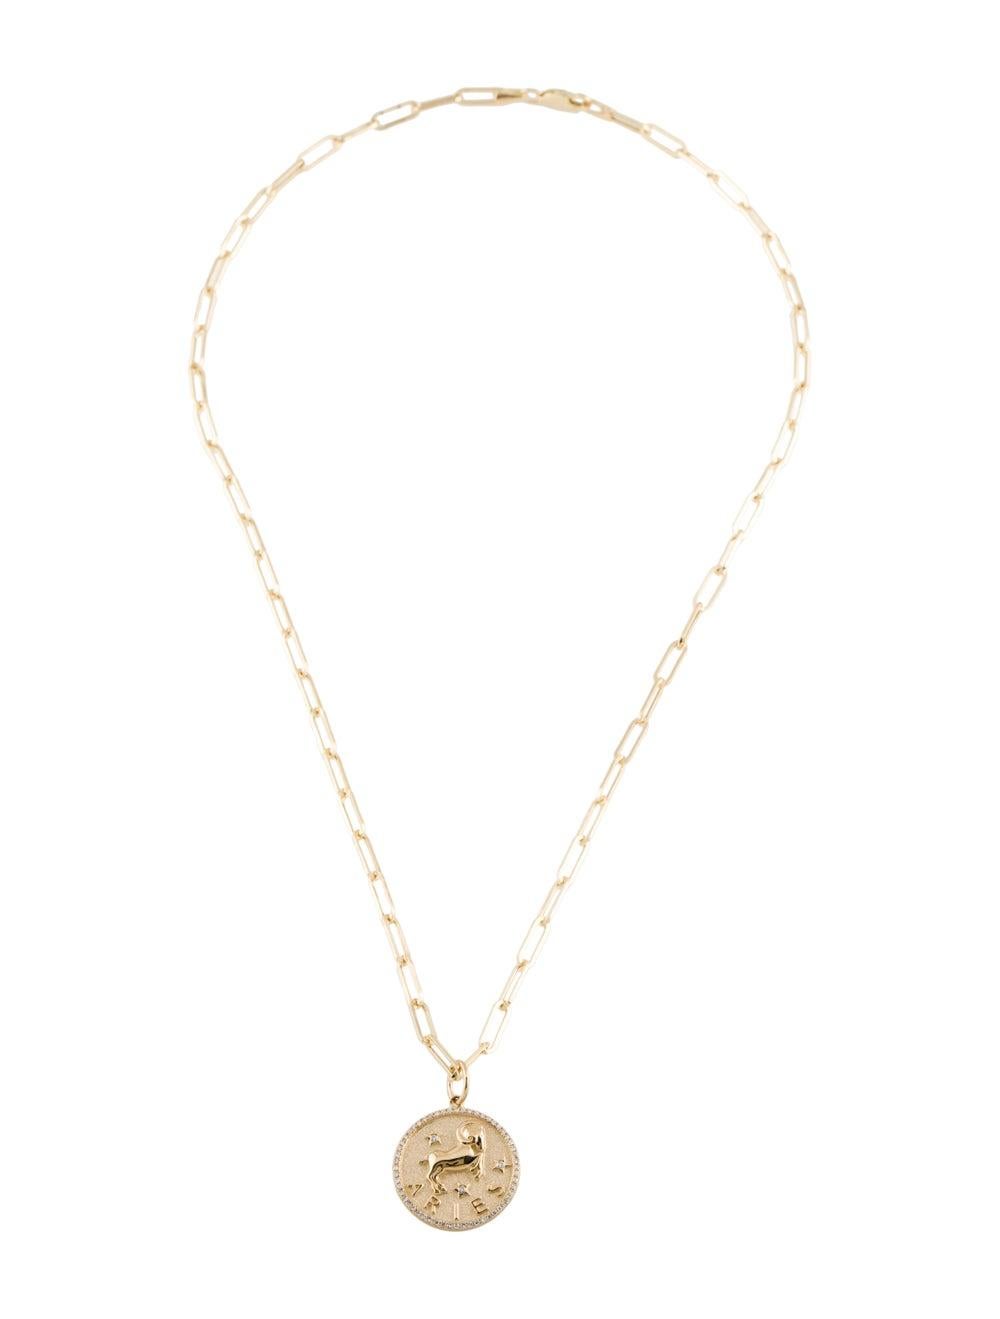 Express your mystical soul by wearing your Zodiac sign! These beautiful Zodiac Necklaces are crafted of 14K Yellow Gold and features approximately 0.21 carats (depends on zodiac) of natural round white Diamonds and hangs on an 14K Yellow Gold 18